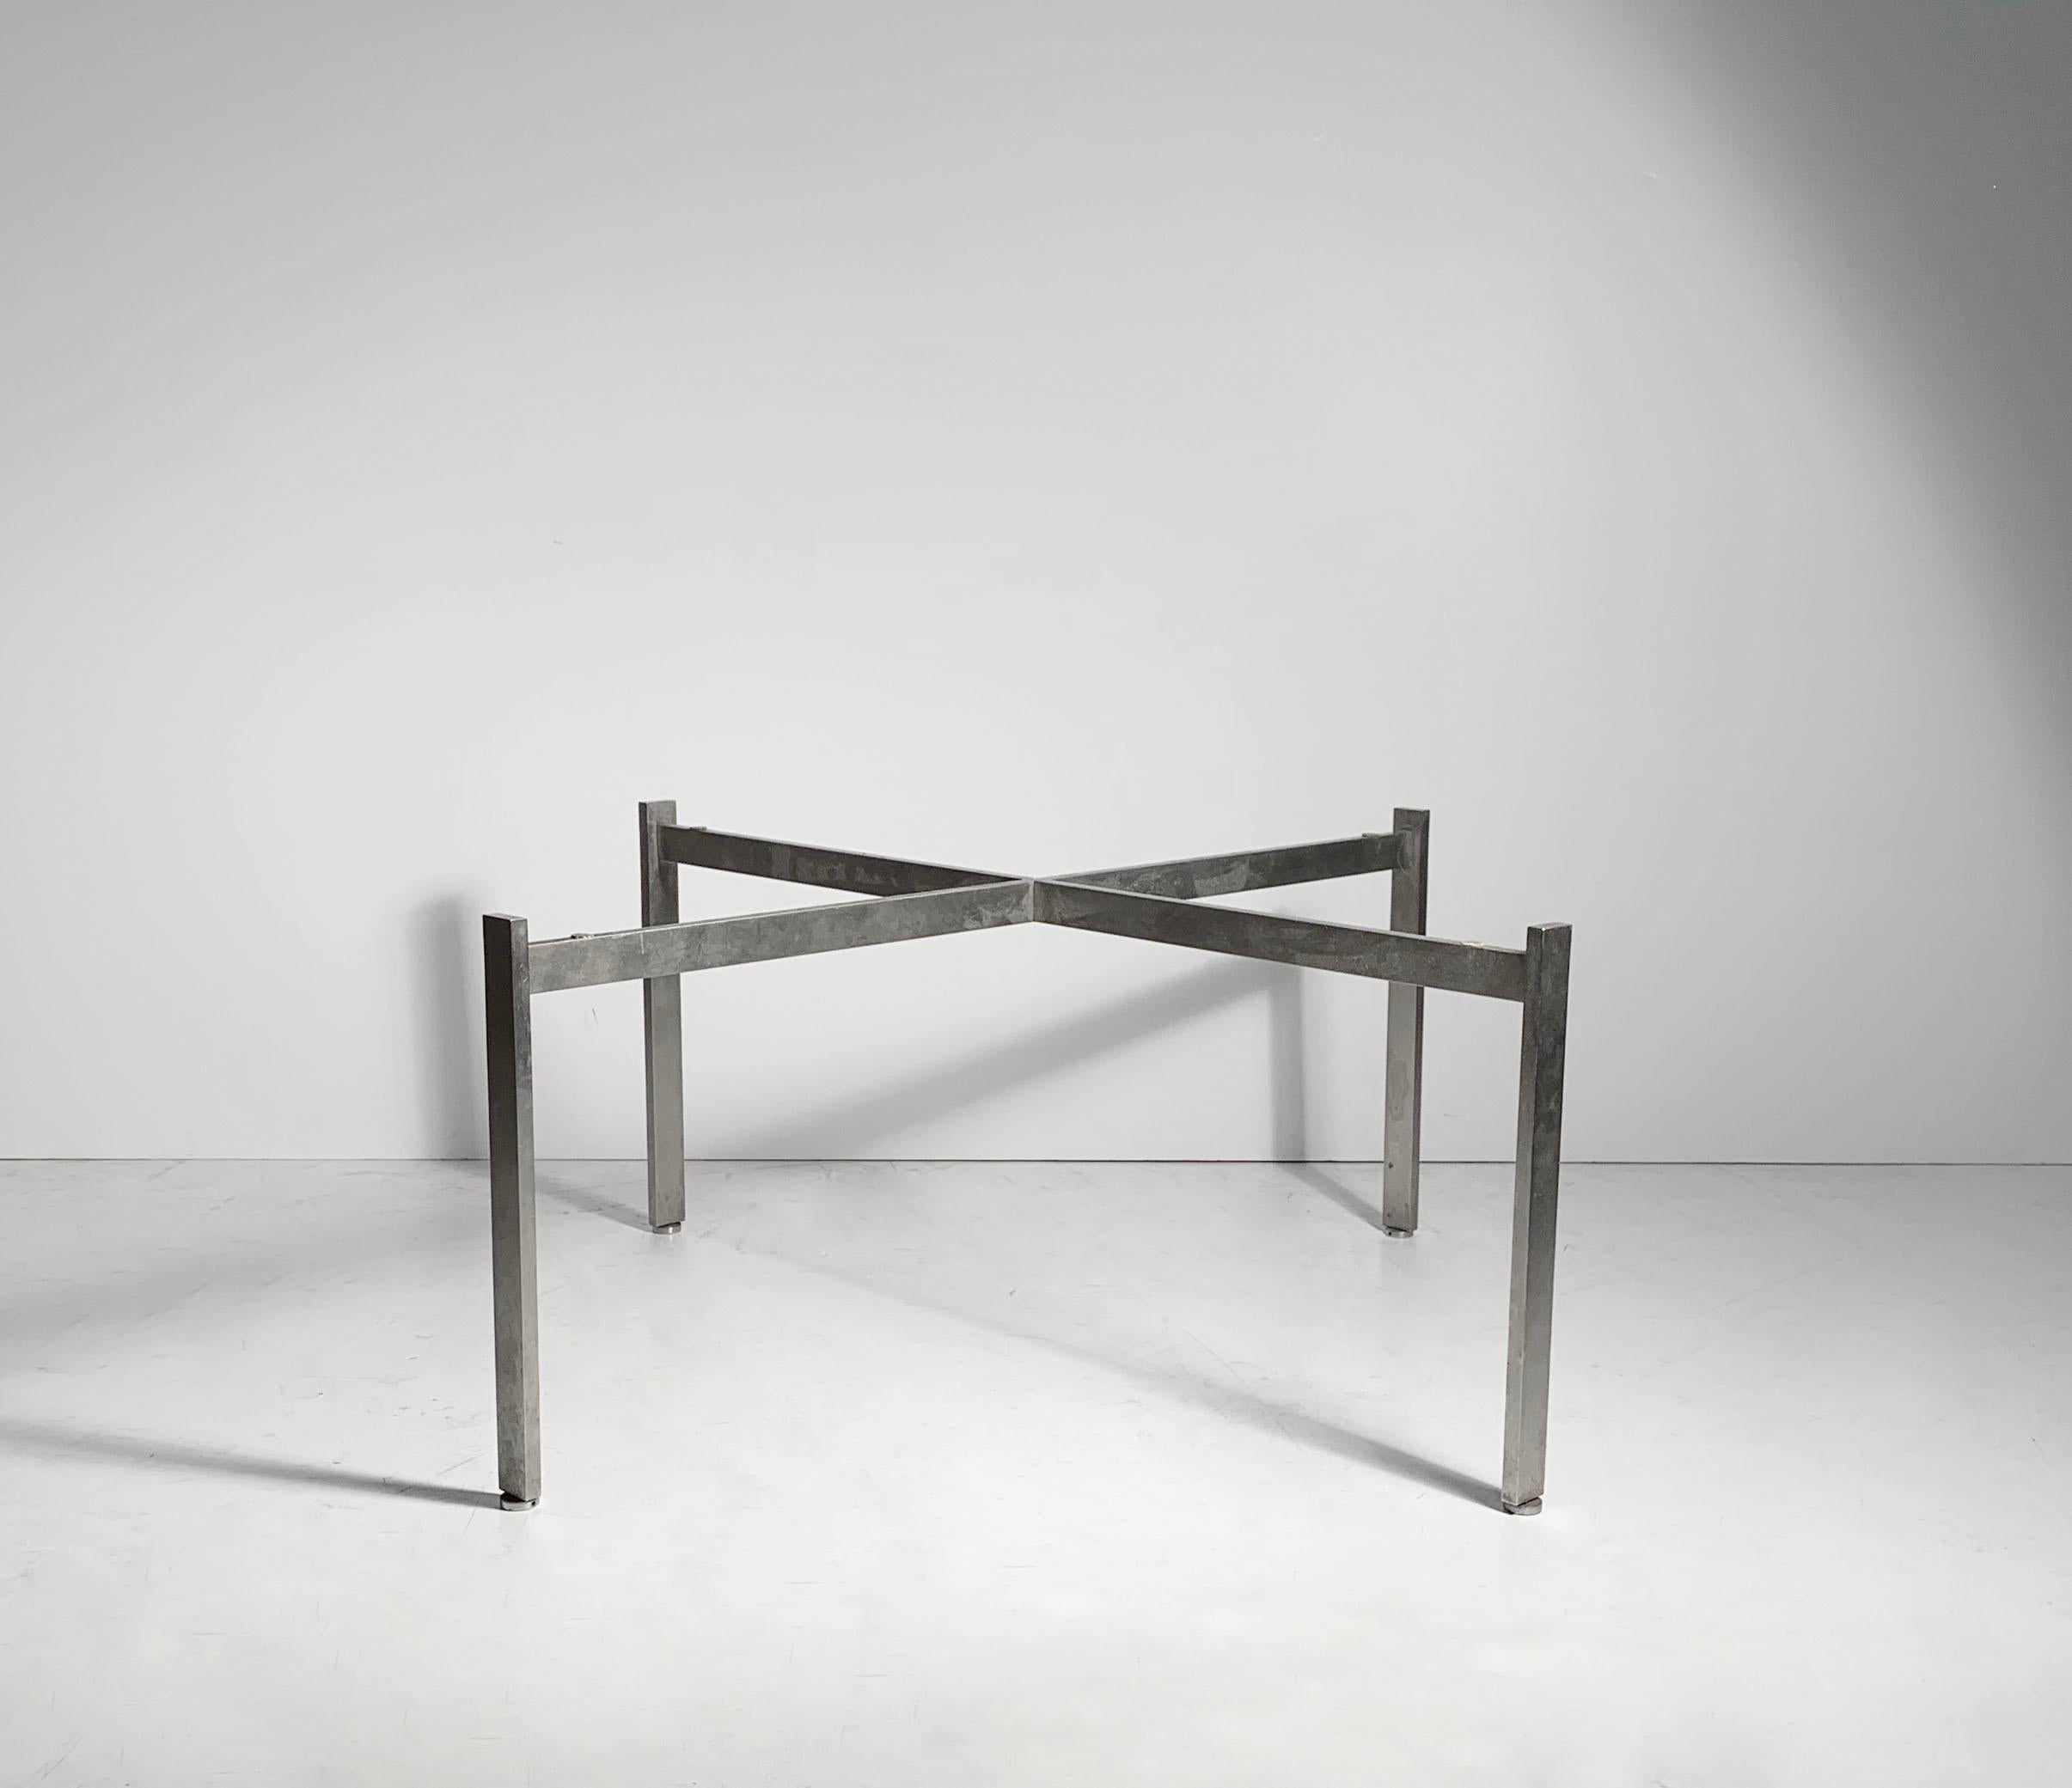 Vintage architectural steel table base. A solid very well made steel base. Uncertain to designer and manufacturer. very much in the manner of Poul Kjaerholm. The steel has a nice understated designer finish. style of Mies van der Rohe

Takes a 36 x